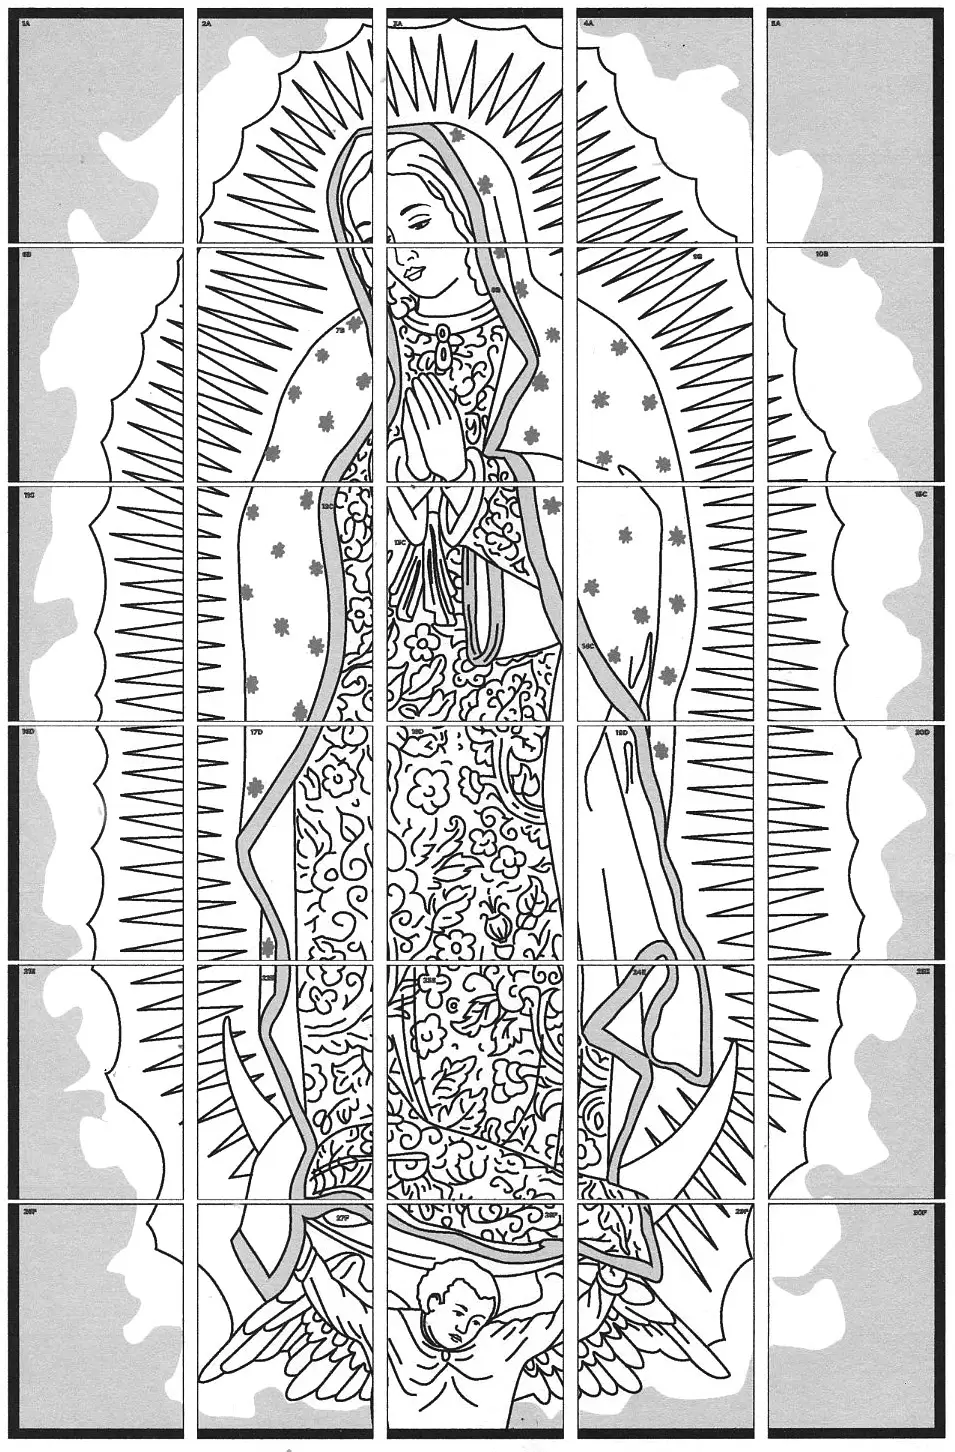 Our lady of guadalupe mural